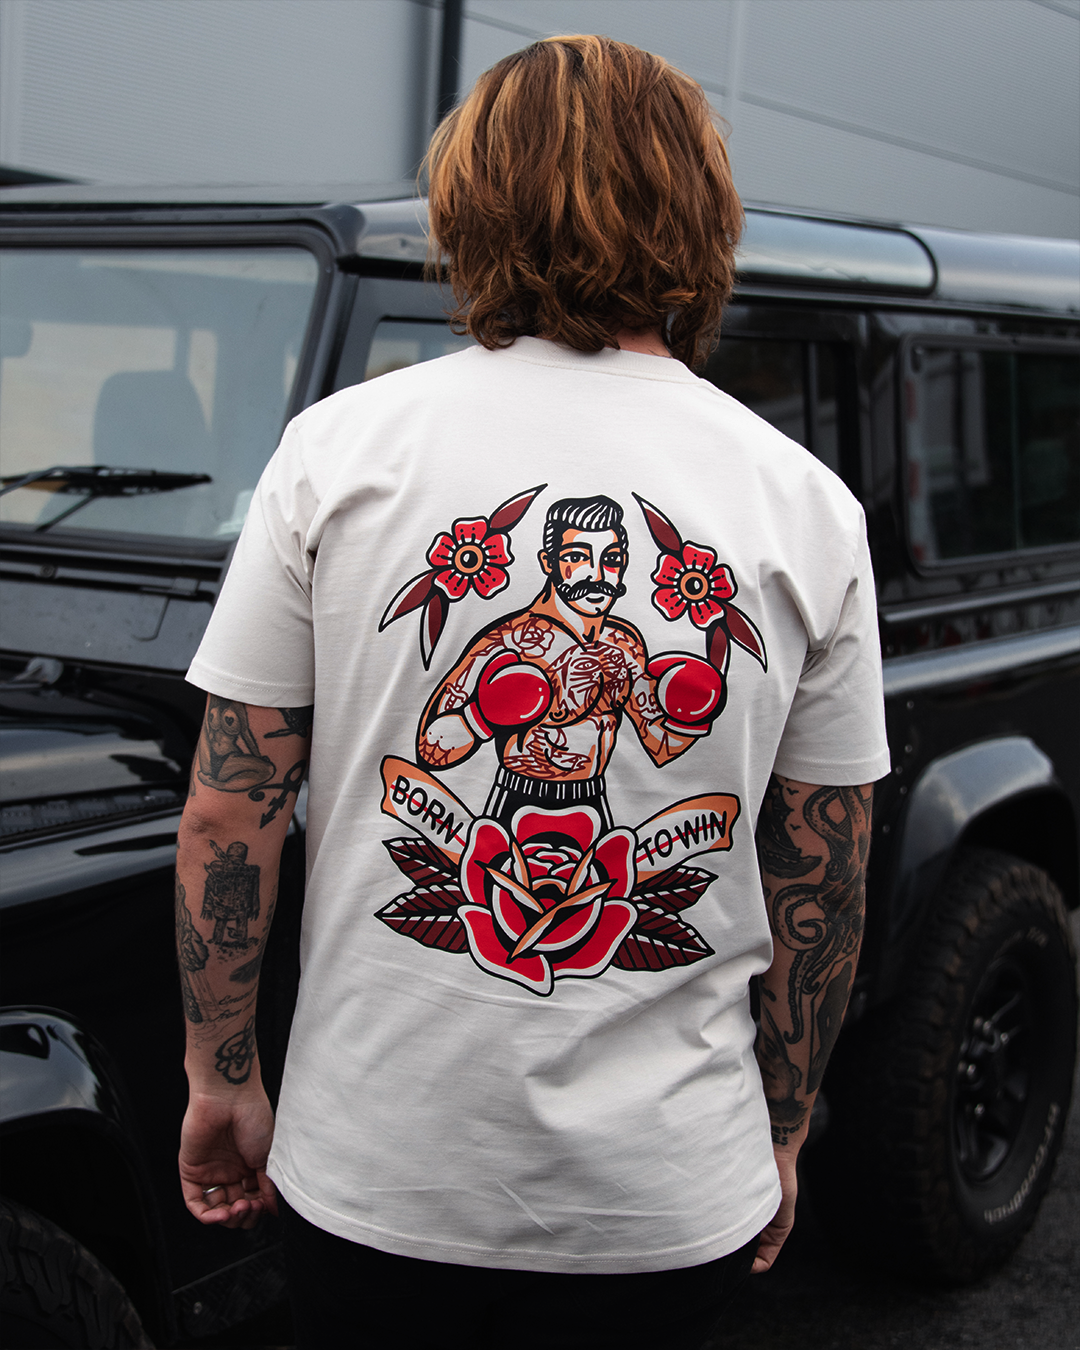 BORN TO WIN - FRONT & BACK - BONE T-SHIRT - DELUXE HEAVY